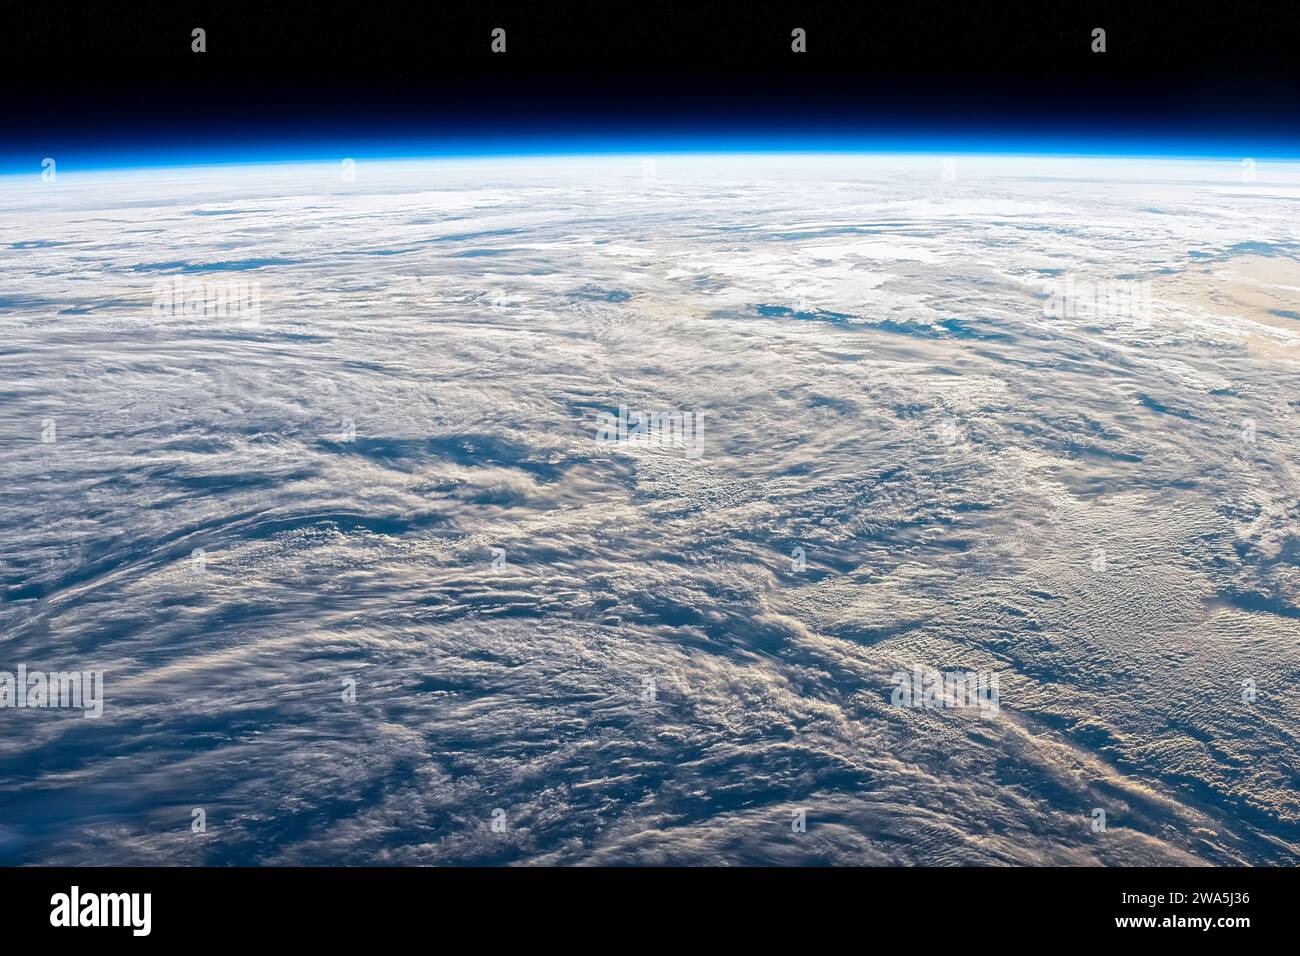 Observations of Planet Earth from Space. Digital enhancement of an image by NASA. Stock Photo